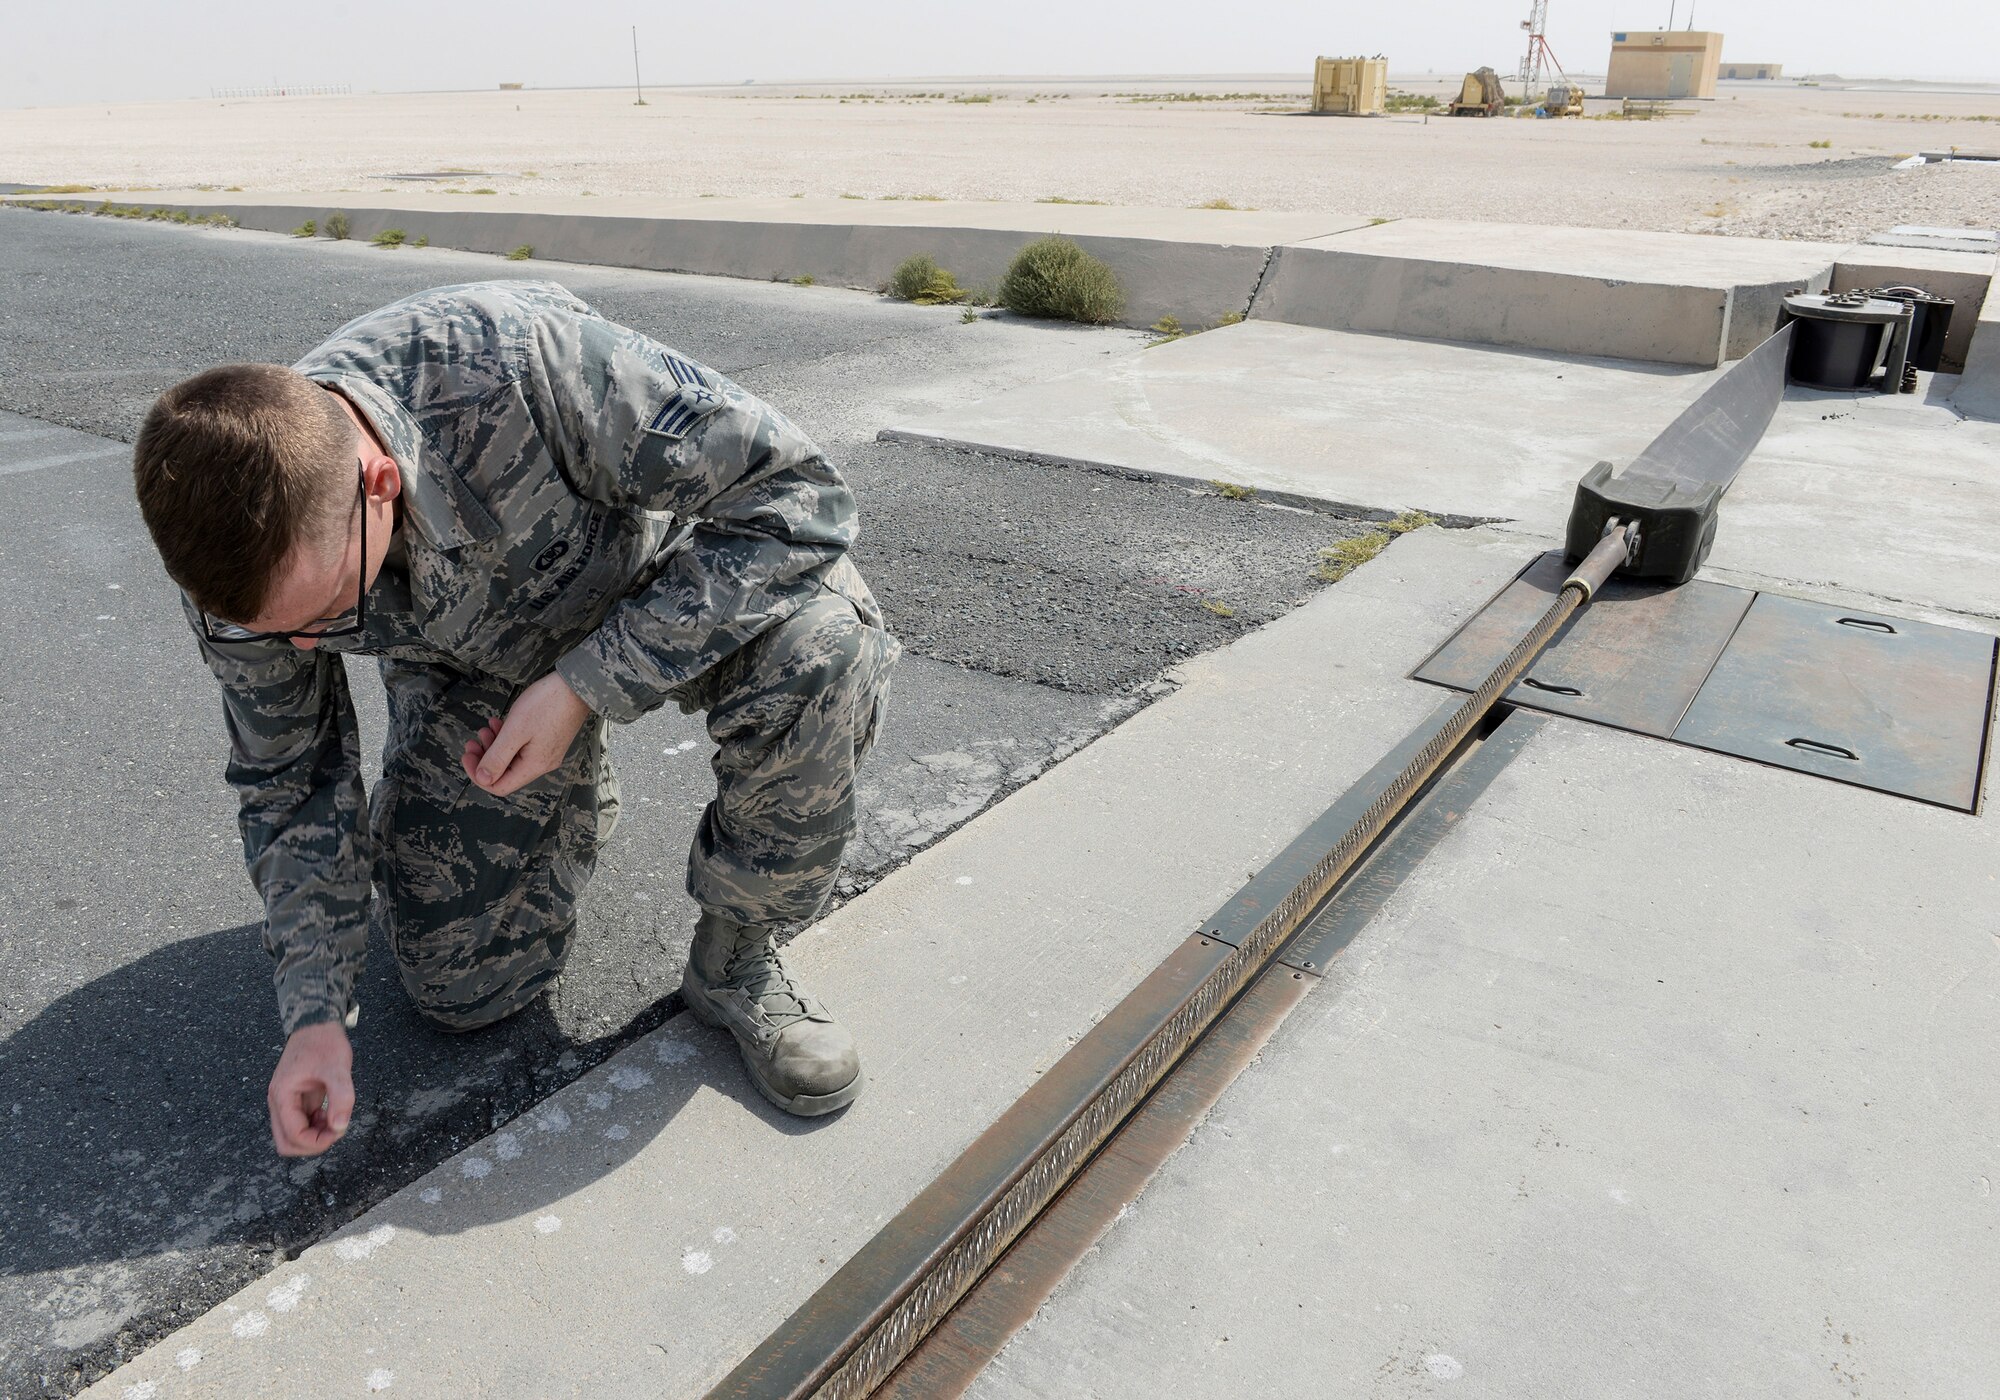 U.S. Air Force Senior Airman Thomas Smith, airfield management shift lead assigned to the 379th Expeditionary Office of Strategic Services, picks up small stones from the runway during a general runway inspection at Al Udeid, Air Force Base, Qatar, June 7, 2017. Airfield Management oversees the 23.3 million square feet of airfield at Al Udeid in addition to overseeing the airfield driving program and filing all flight plans for flights arriving to and departing from the base. (U.S. Air National Guard photo by Tech. Sgt. Bradly A. Schneider/Released)